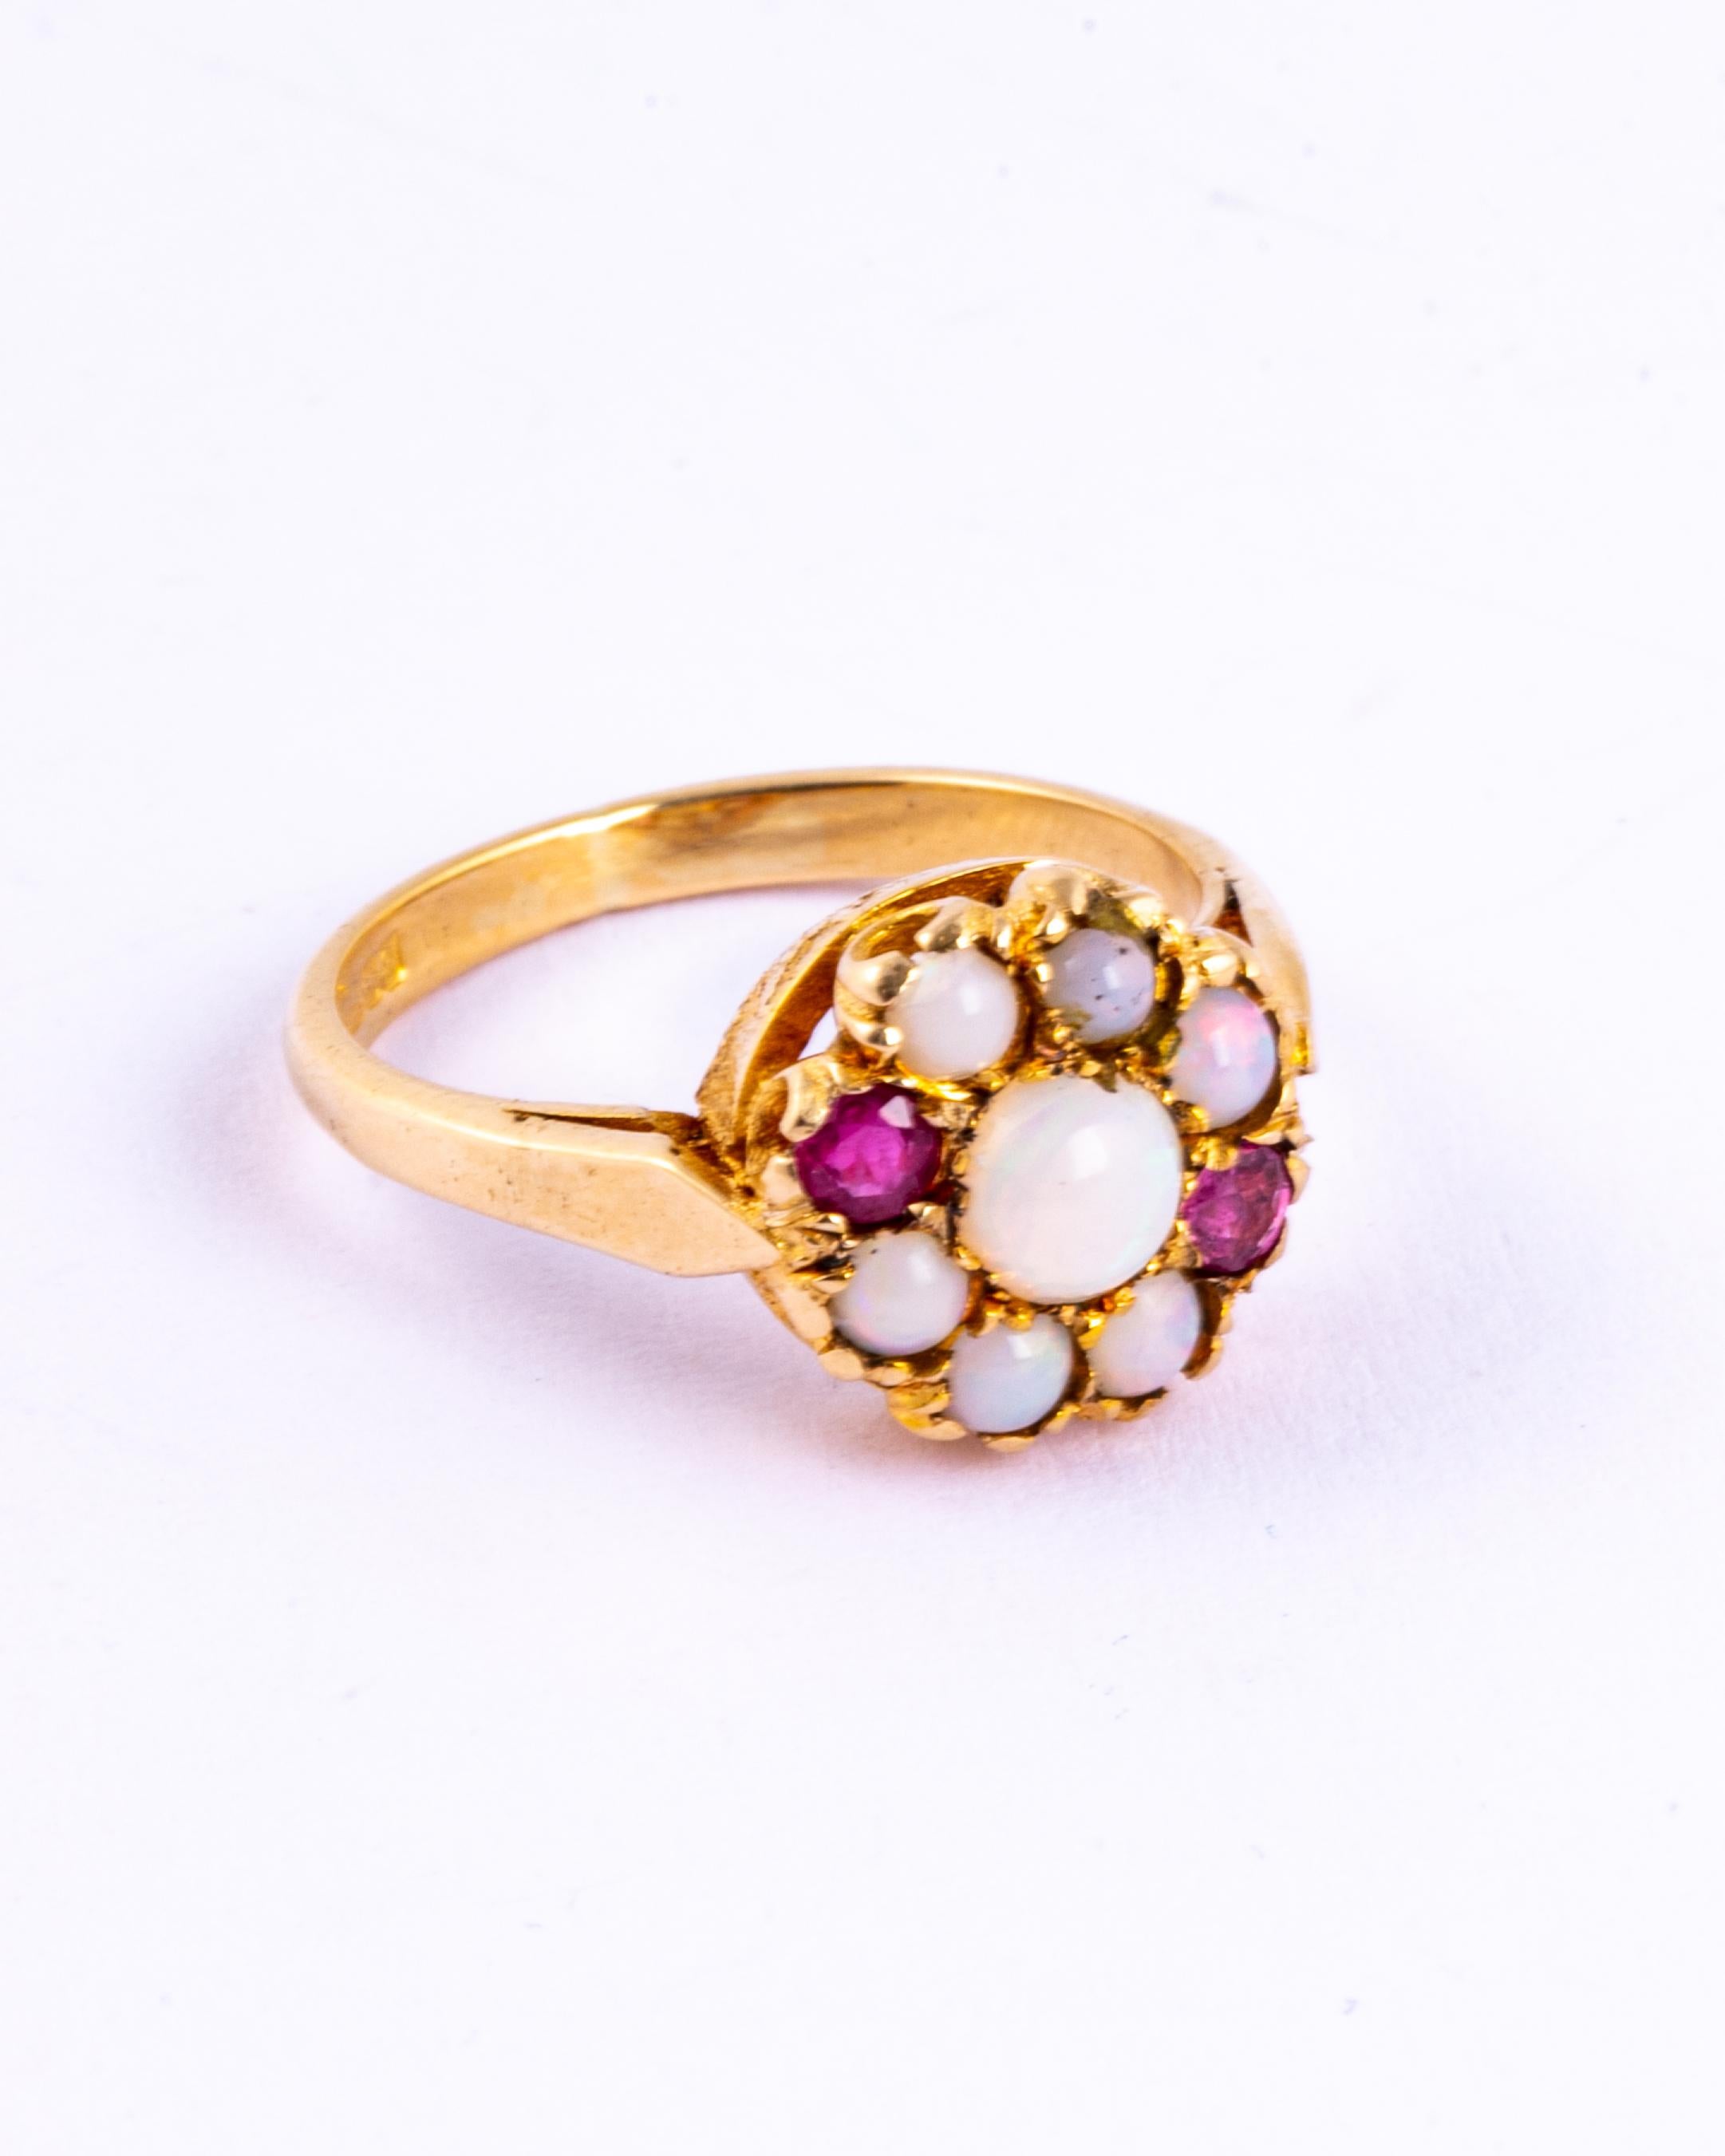 This sweet cluster ring holds a total of 7 colourful opals and two rubies. The rubies measure 10pts each and the opal total approximately 90pts. The ring is modelled in 9ct gold and made in Birmingham, England. 

Ring Size: K or 5 1/4
Cluster